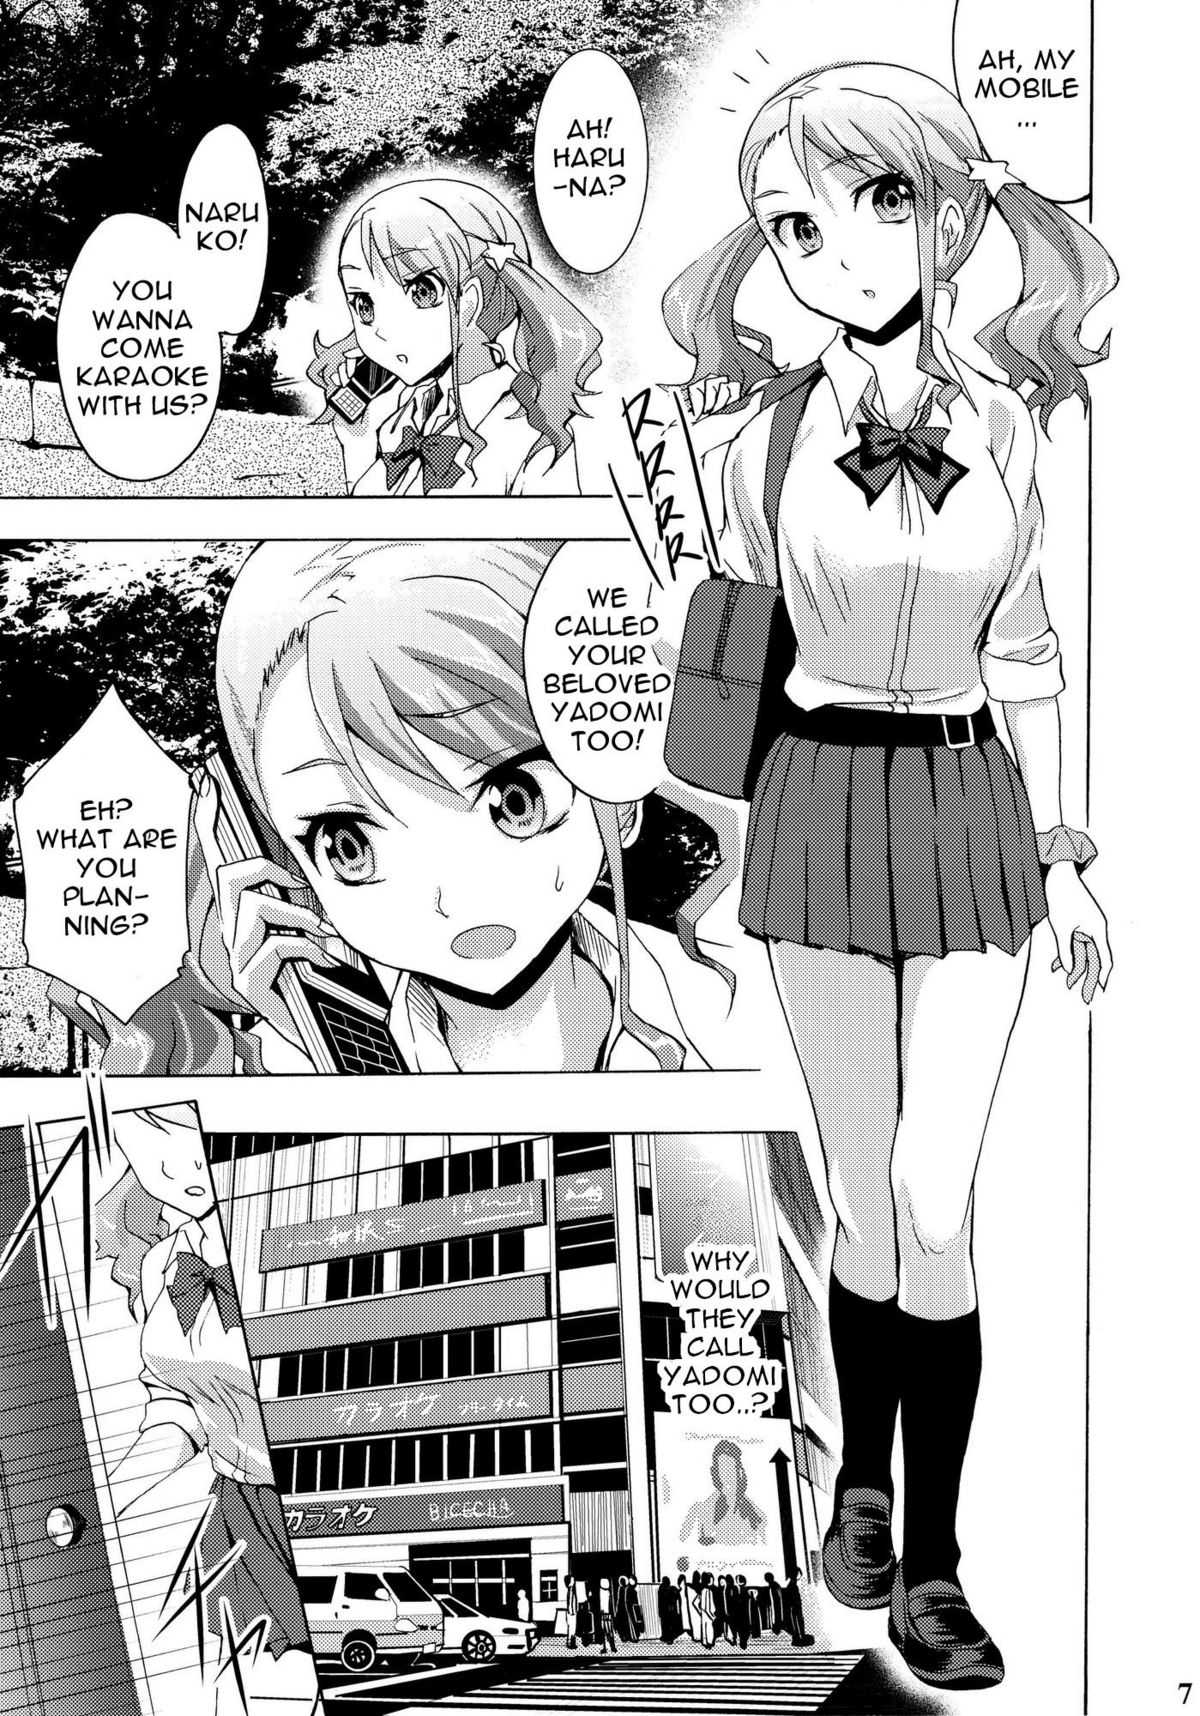 [Otabe Dynamites] Super Love Lost Busters (AnoHana) [Eng] {doujin-moe.us} 